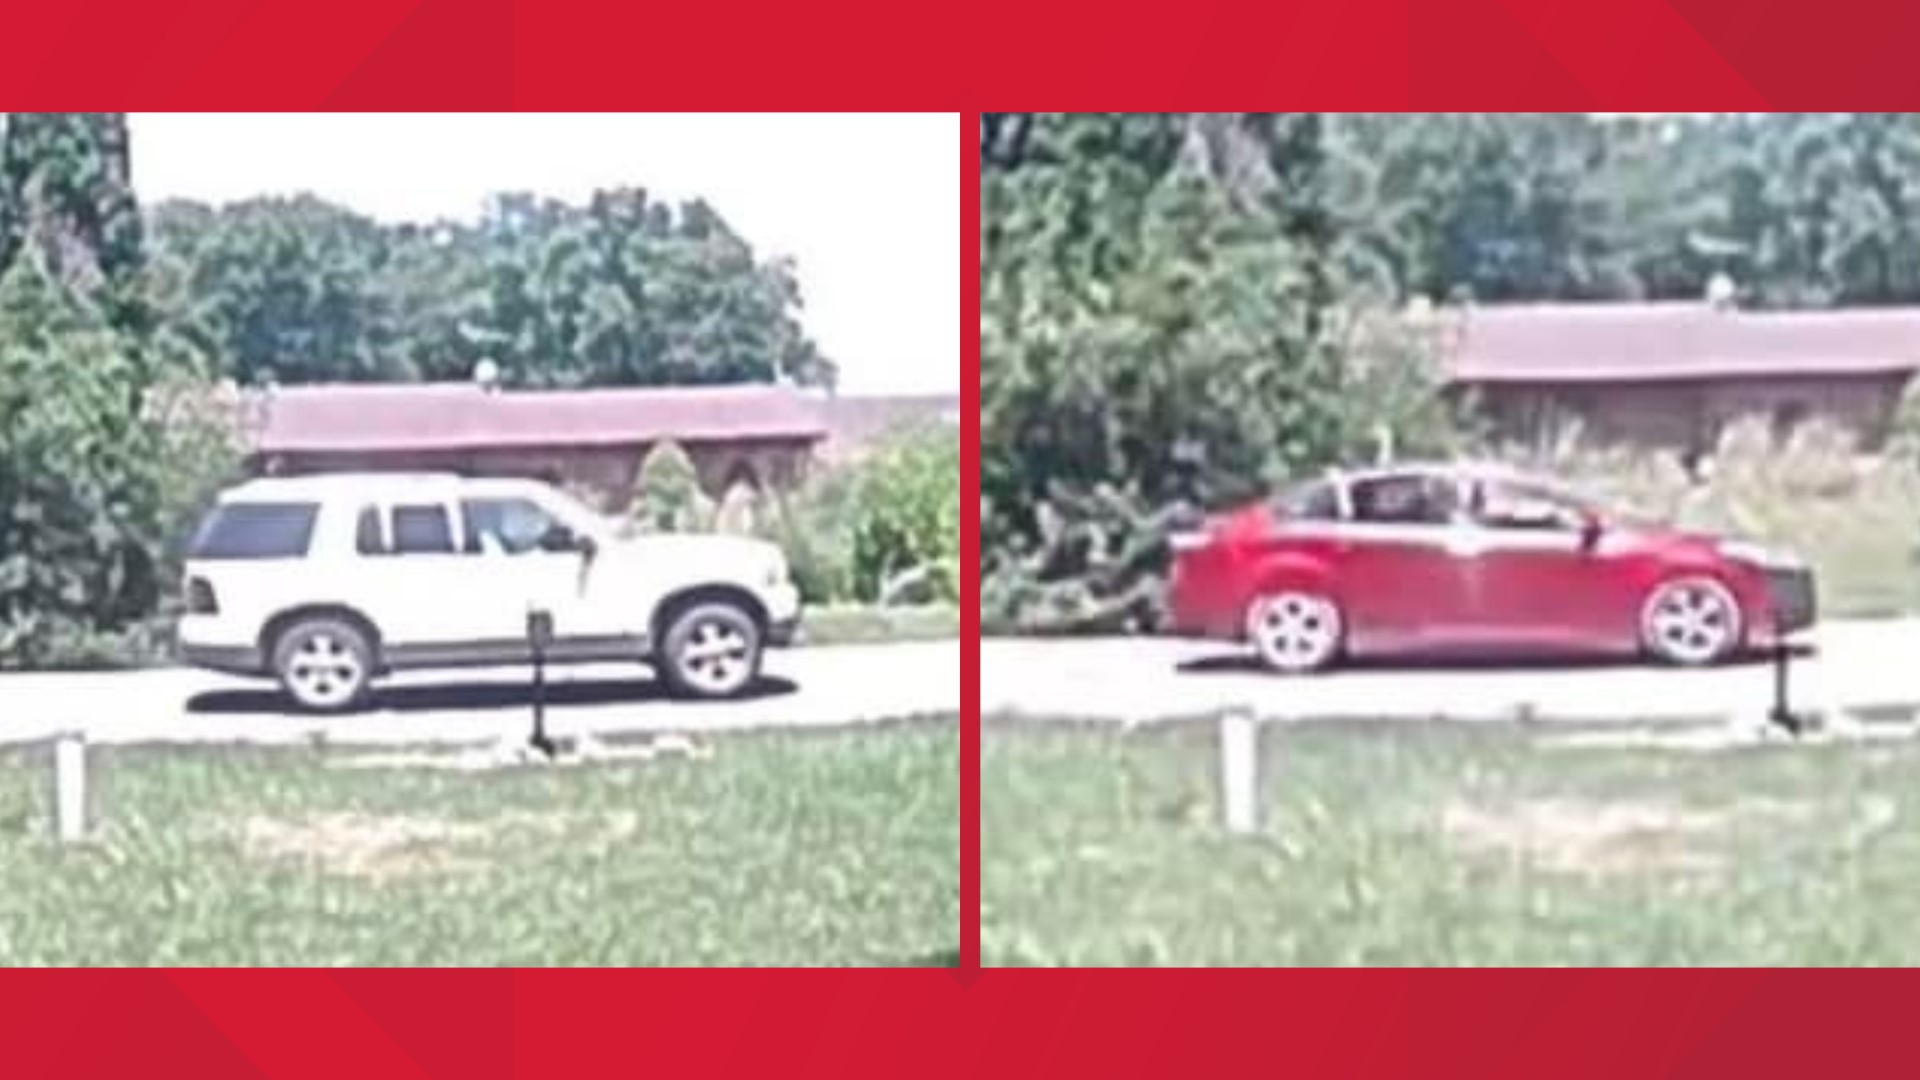 The sheriff's office is asking anyone with information about the occupants or the owners of the vehicles to call 765-747-7881 ext 445.